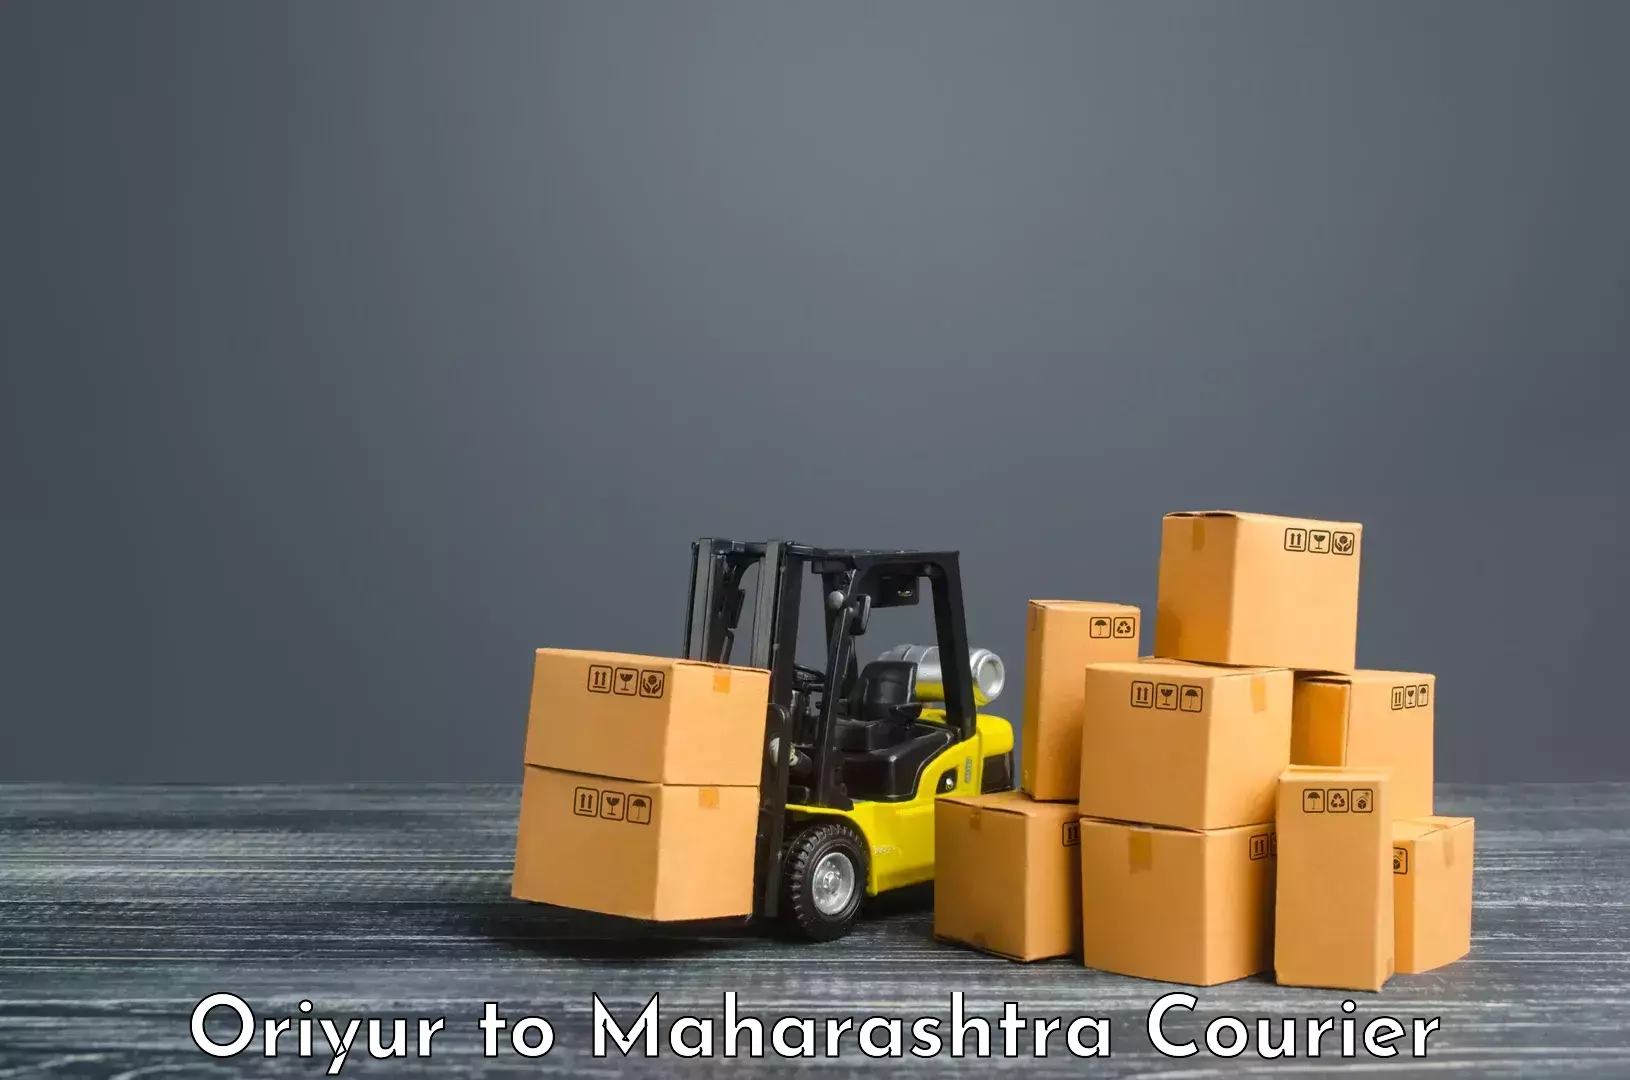 Global courier networks Oriyur to Wardha